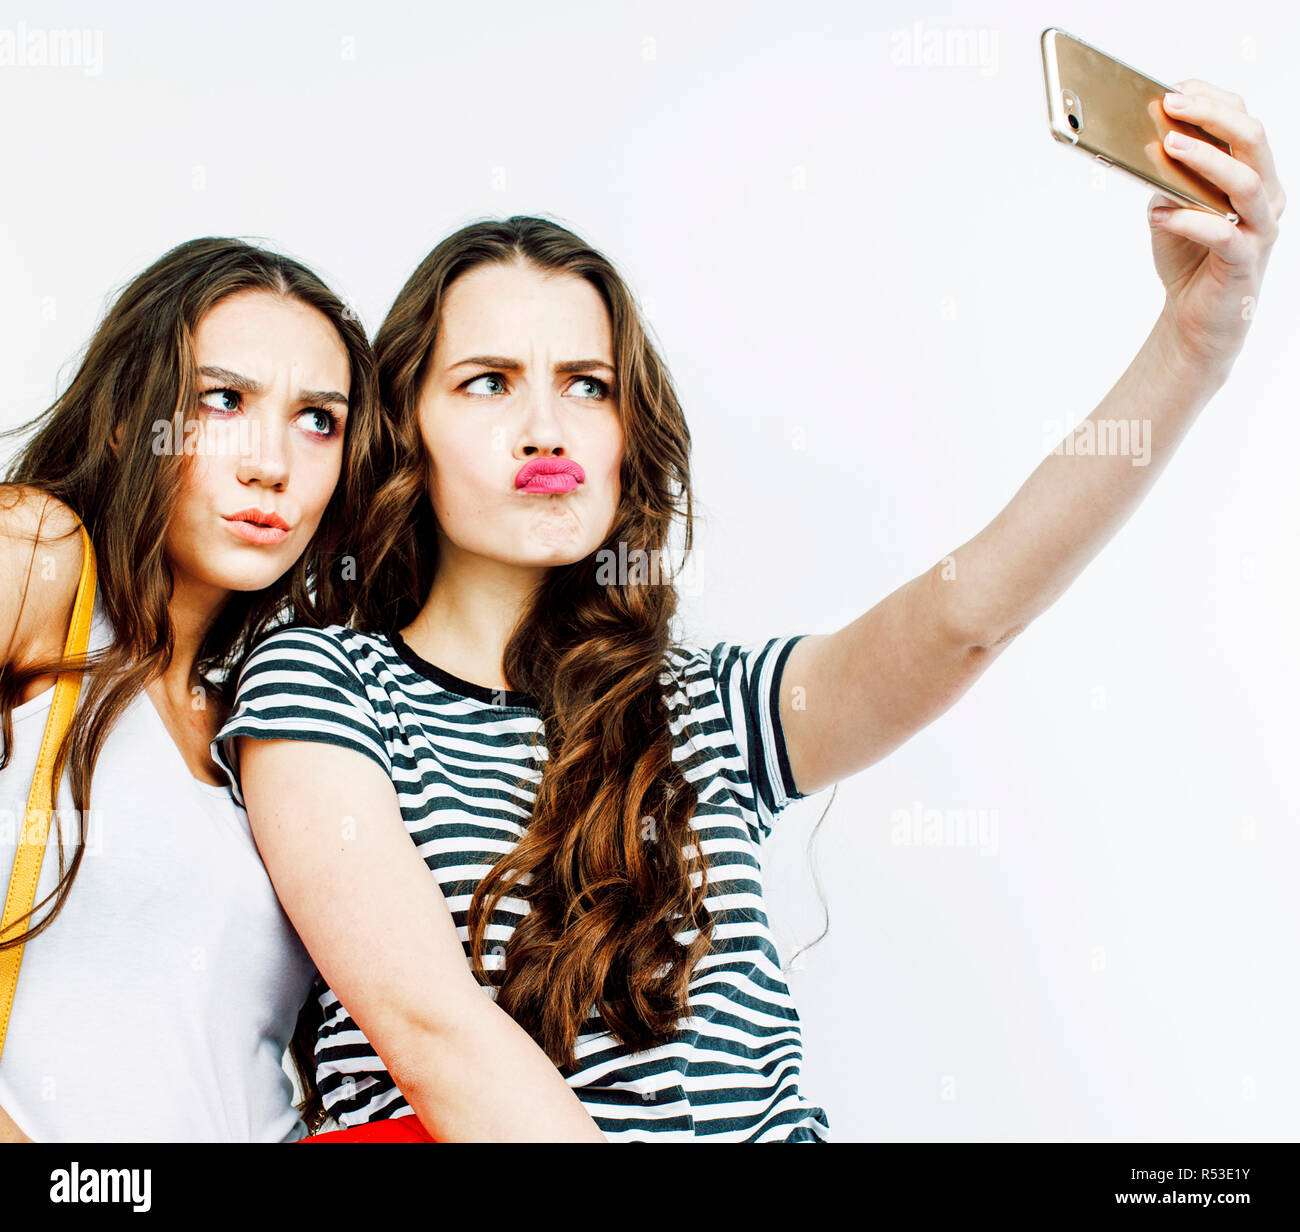 Take Better Selfies With These 97 Essential Selfie Poses & Posing Tips